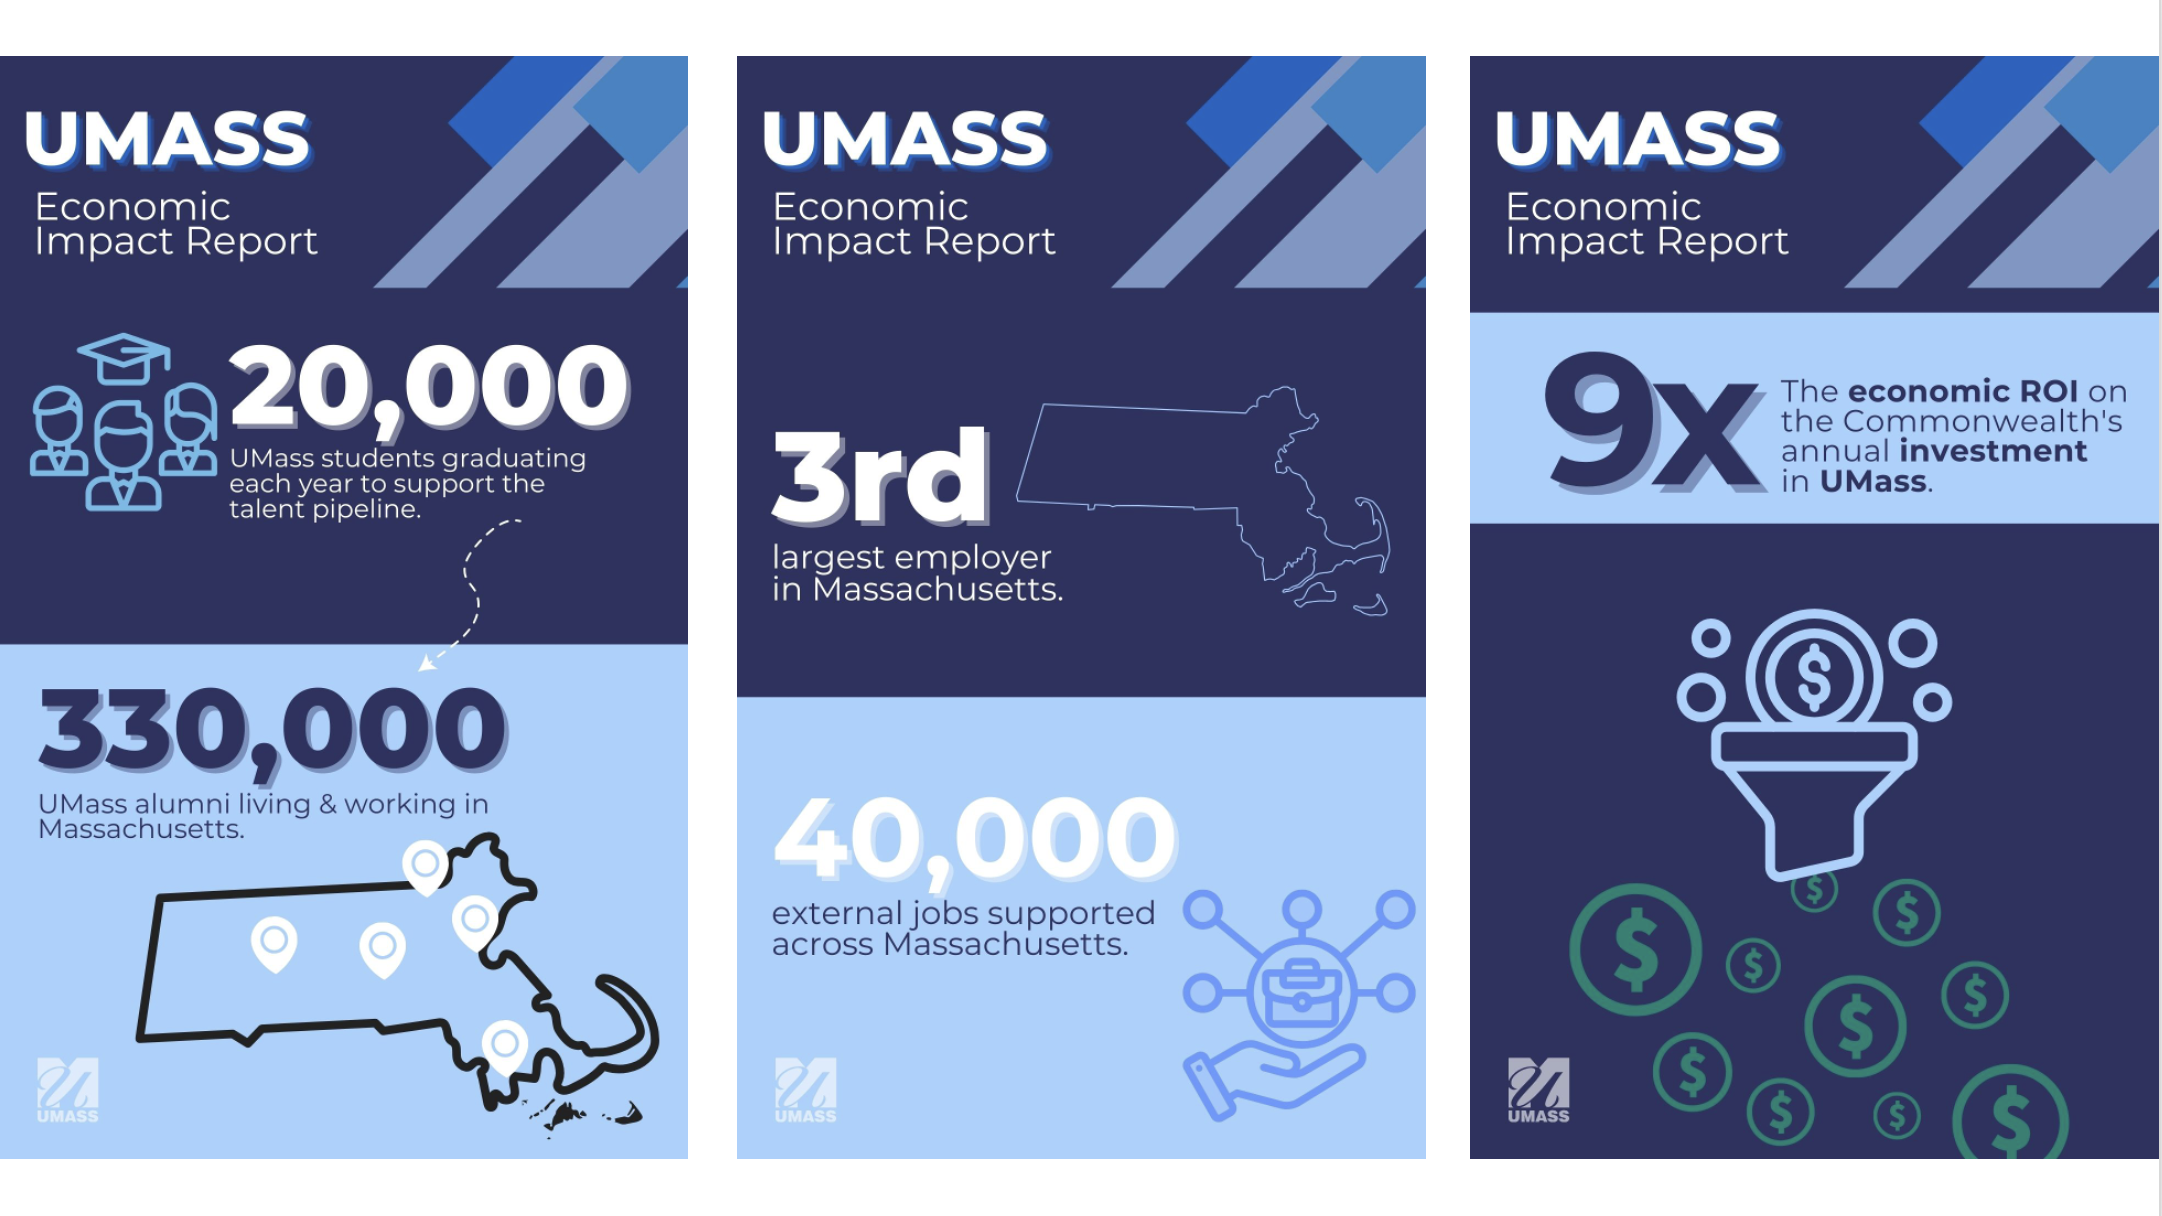 Three UMass infographics highlighting key insights from the 2022 economic impact report such as UMass graduates 20,000 students per year, 330,000 alumni live and work in Massachusetts, and more.